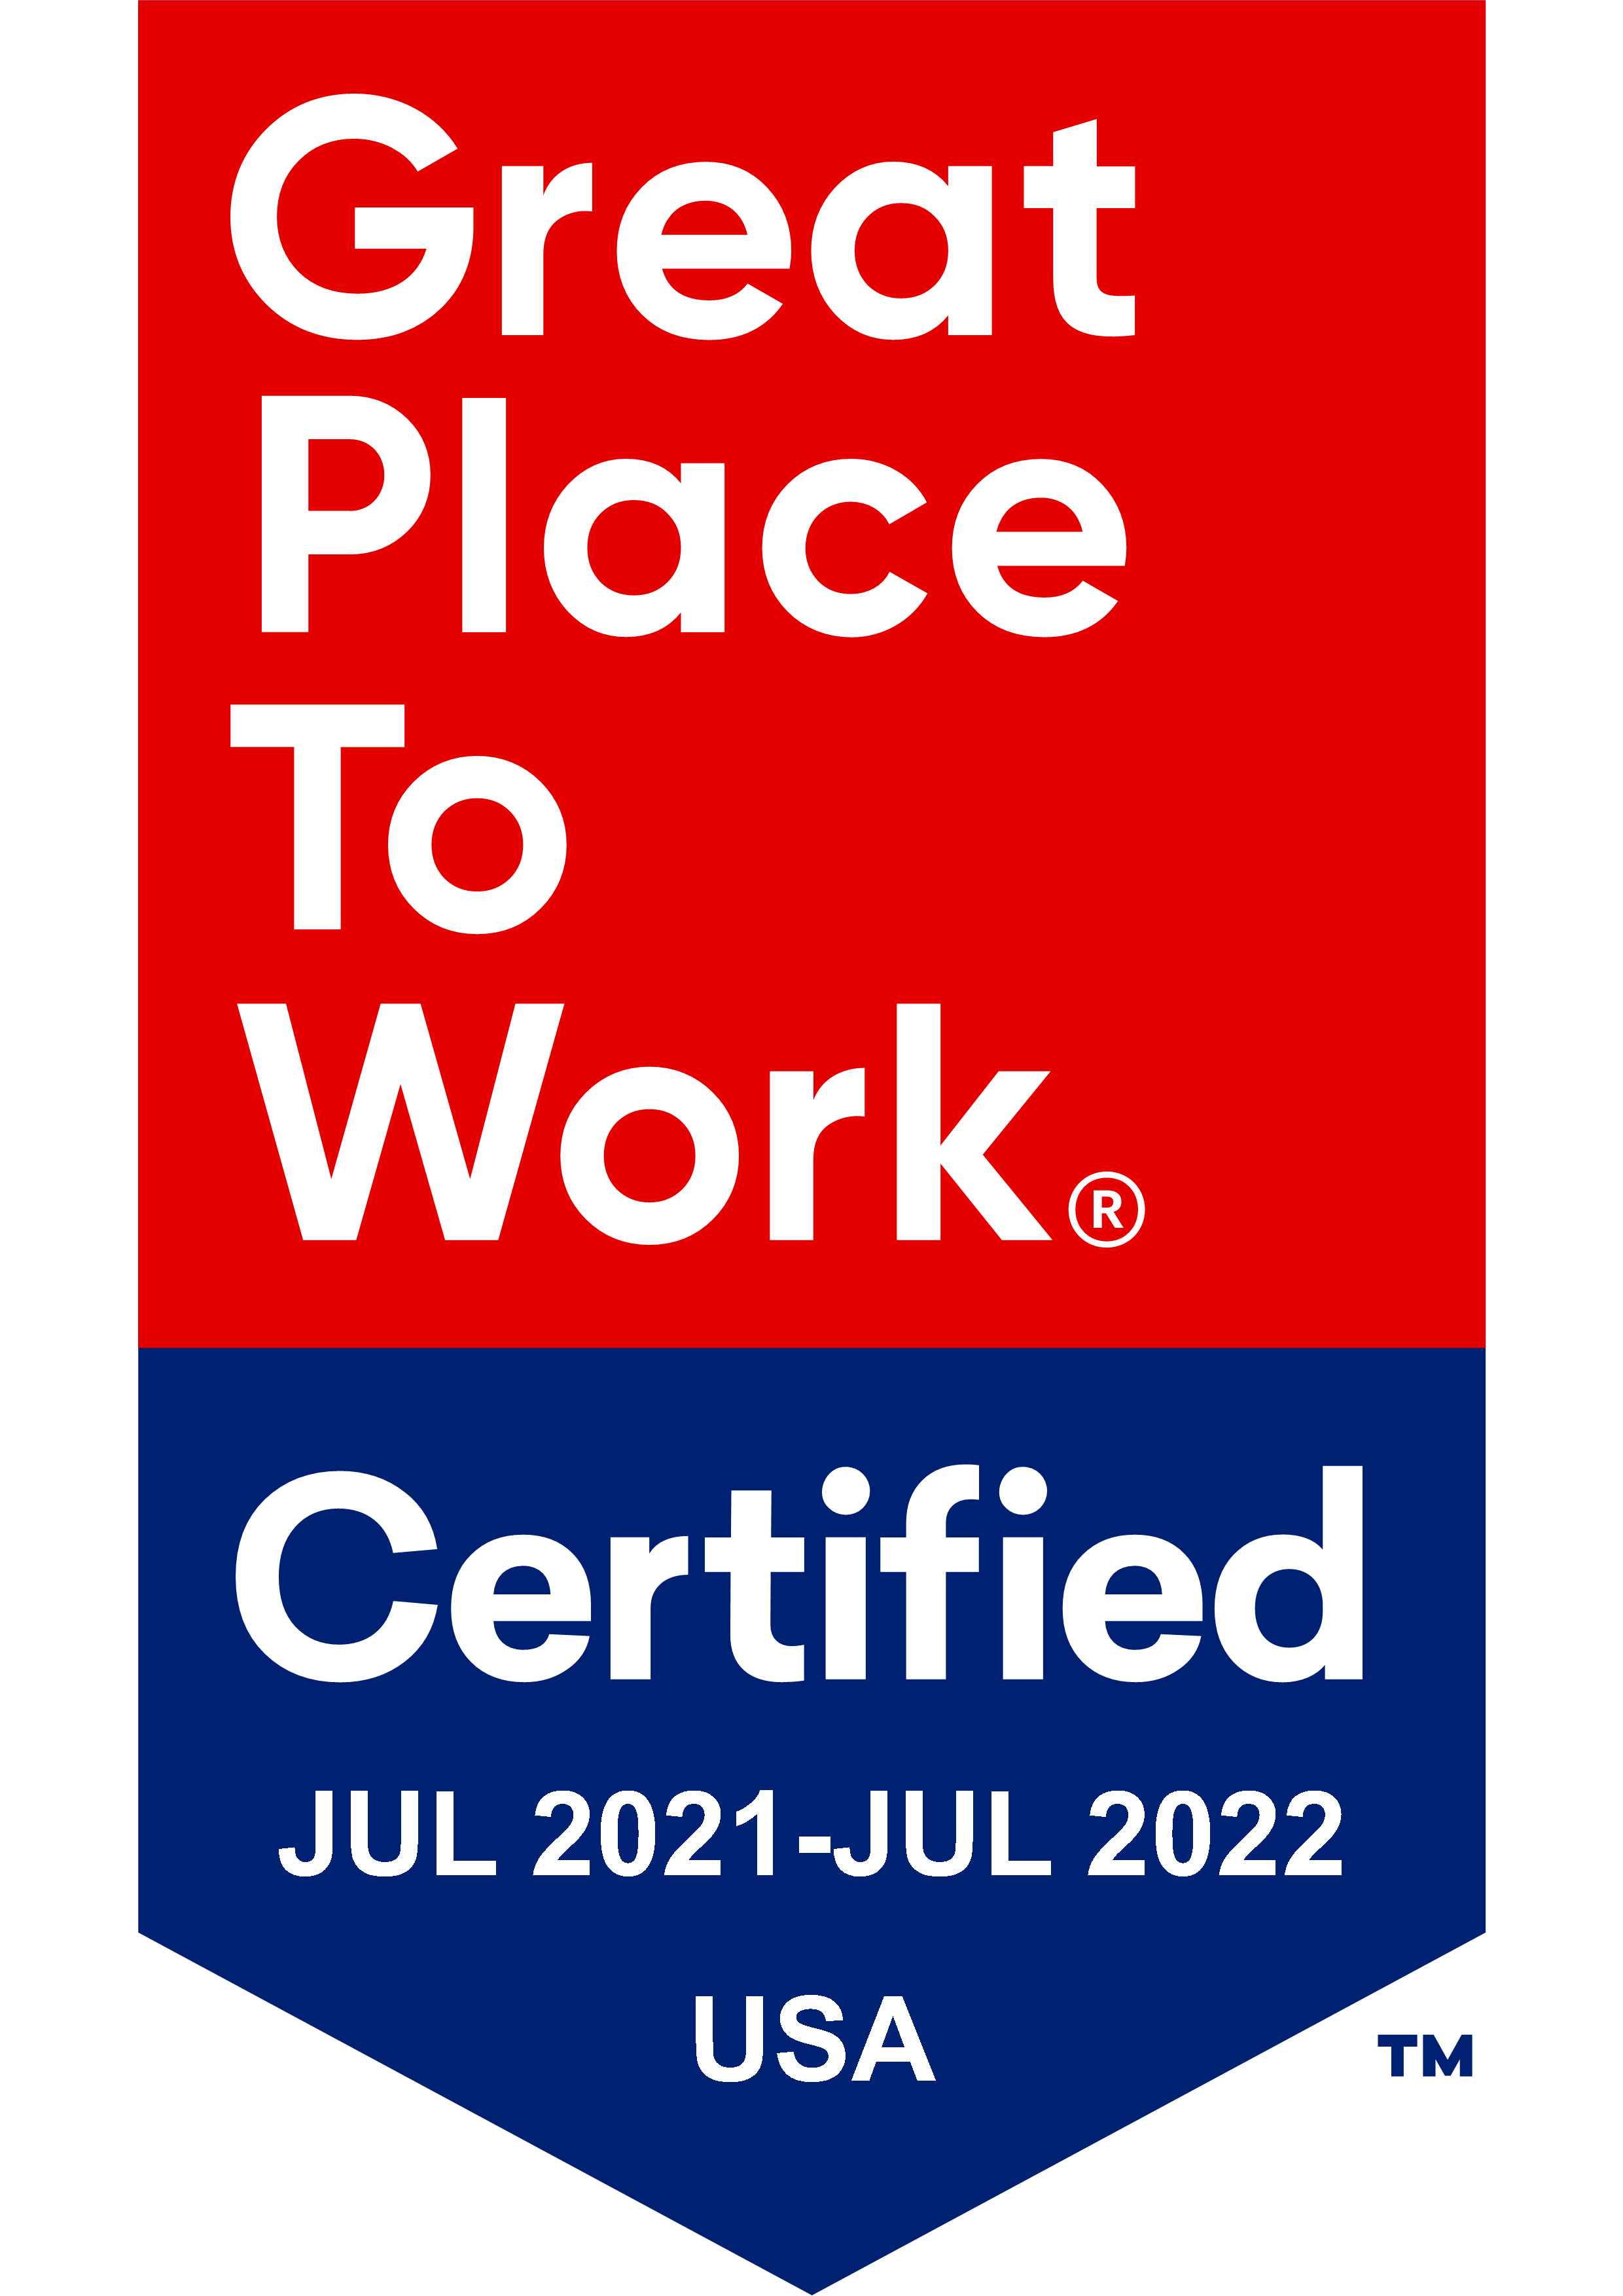 Great Place to Work Award: July 2021 - July 2022